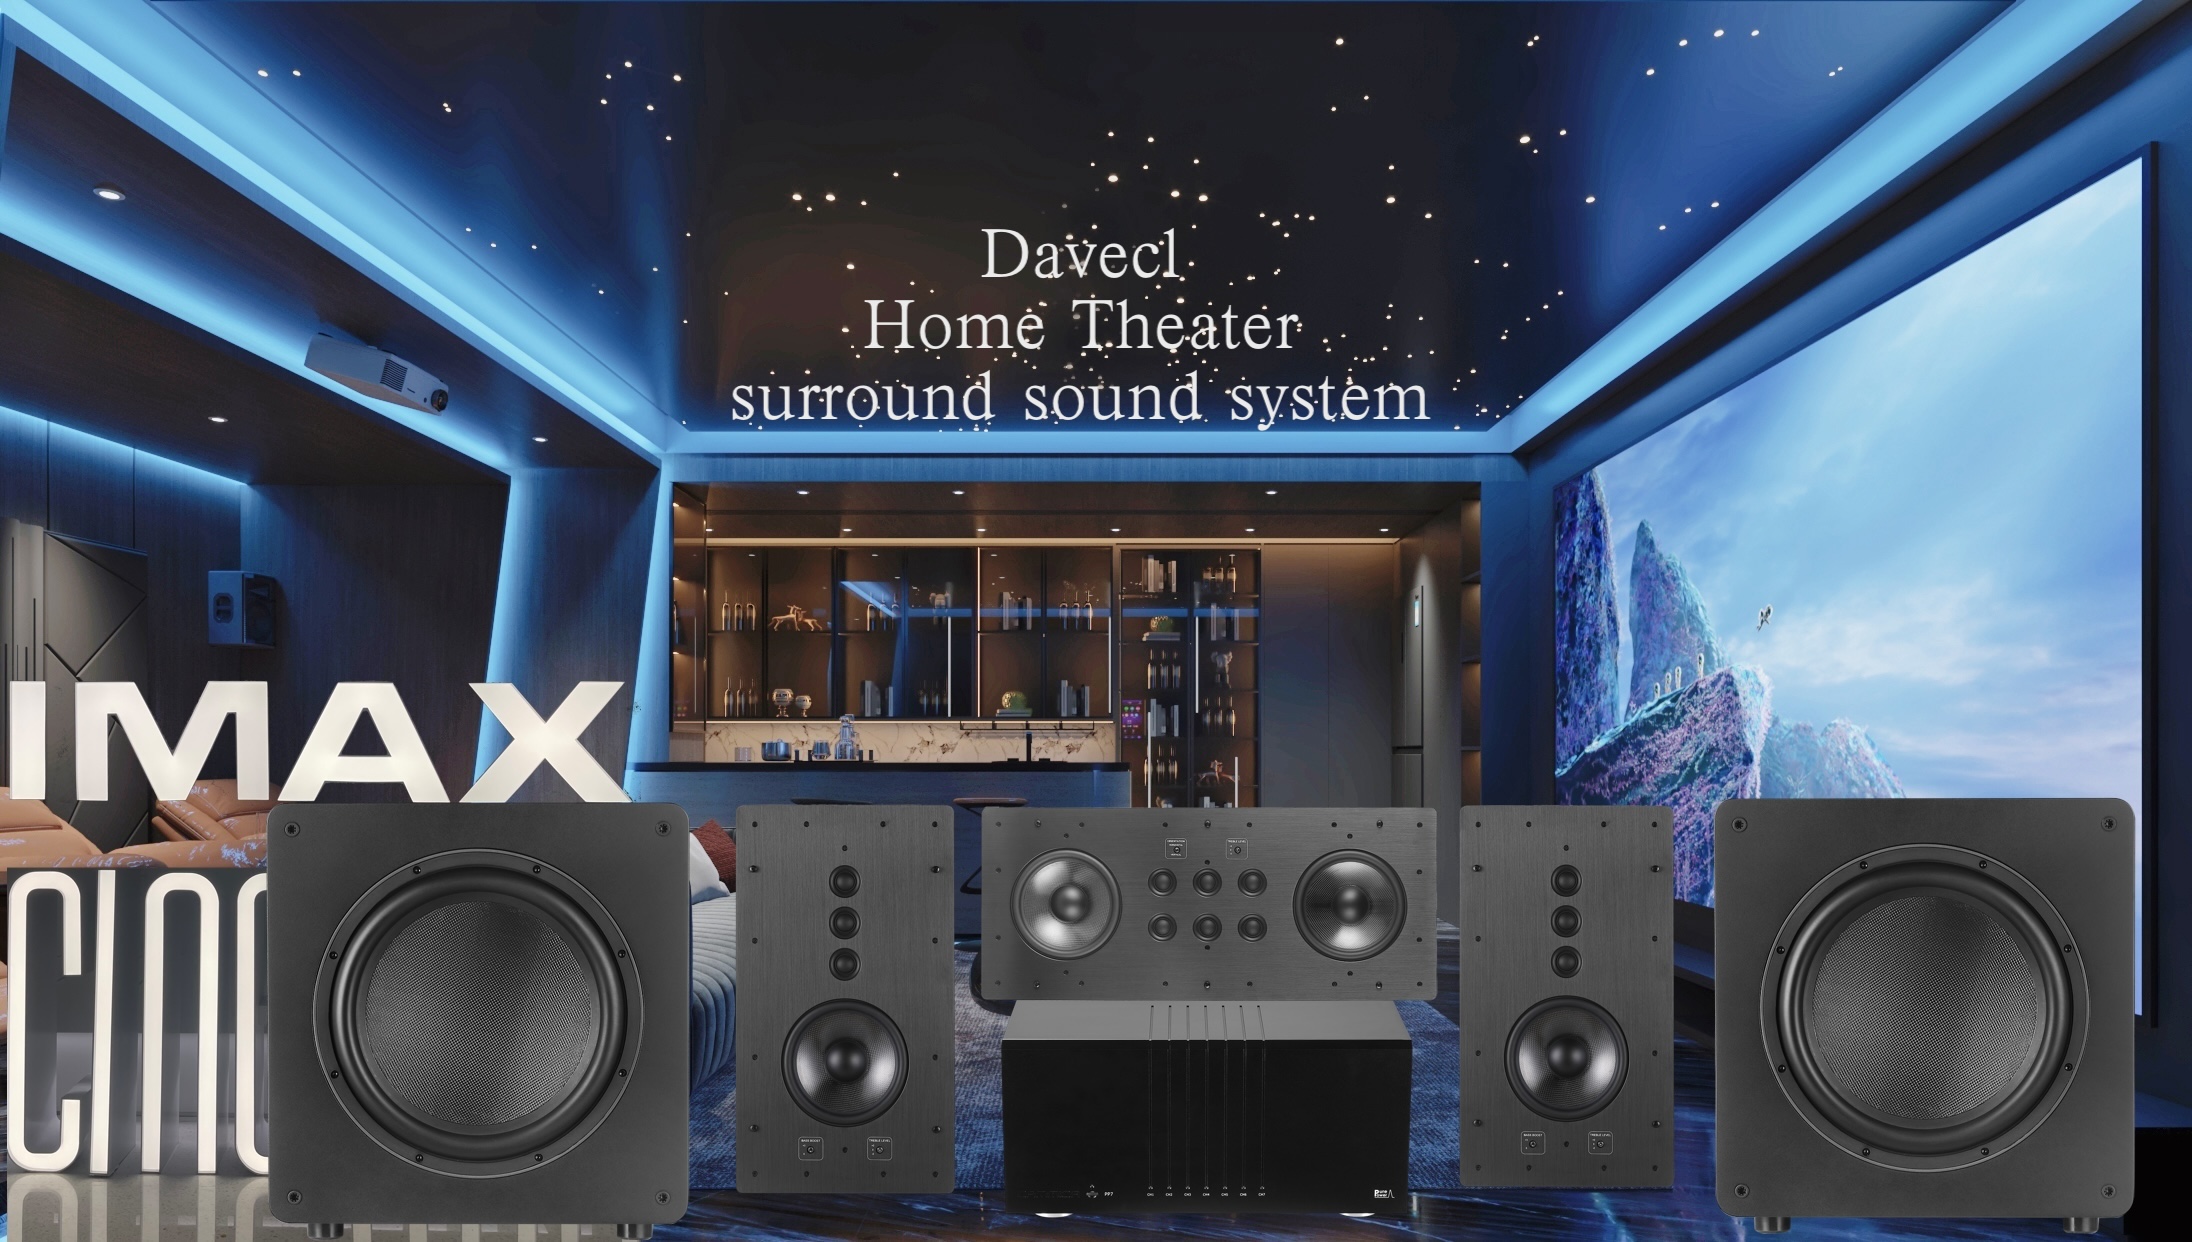 Do you know these knowledge points about setting up a home theater in your living room?